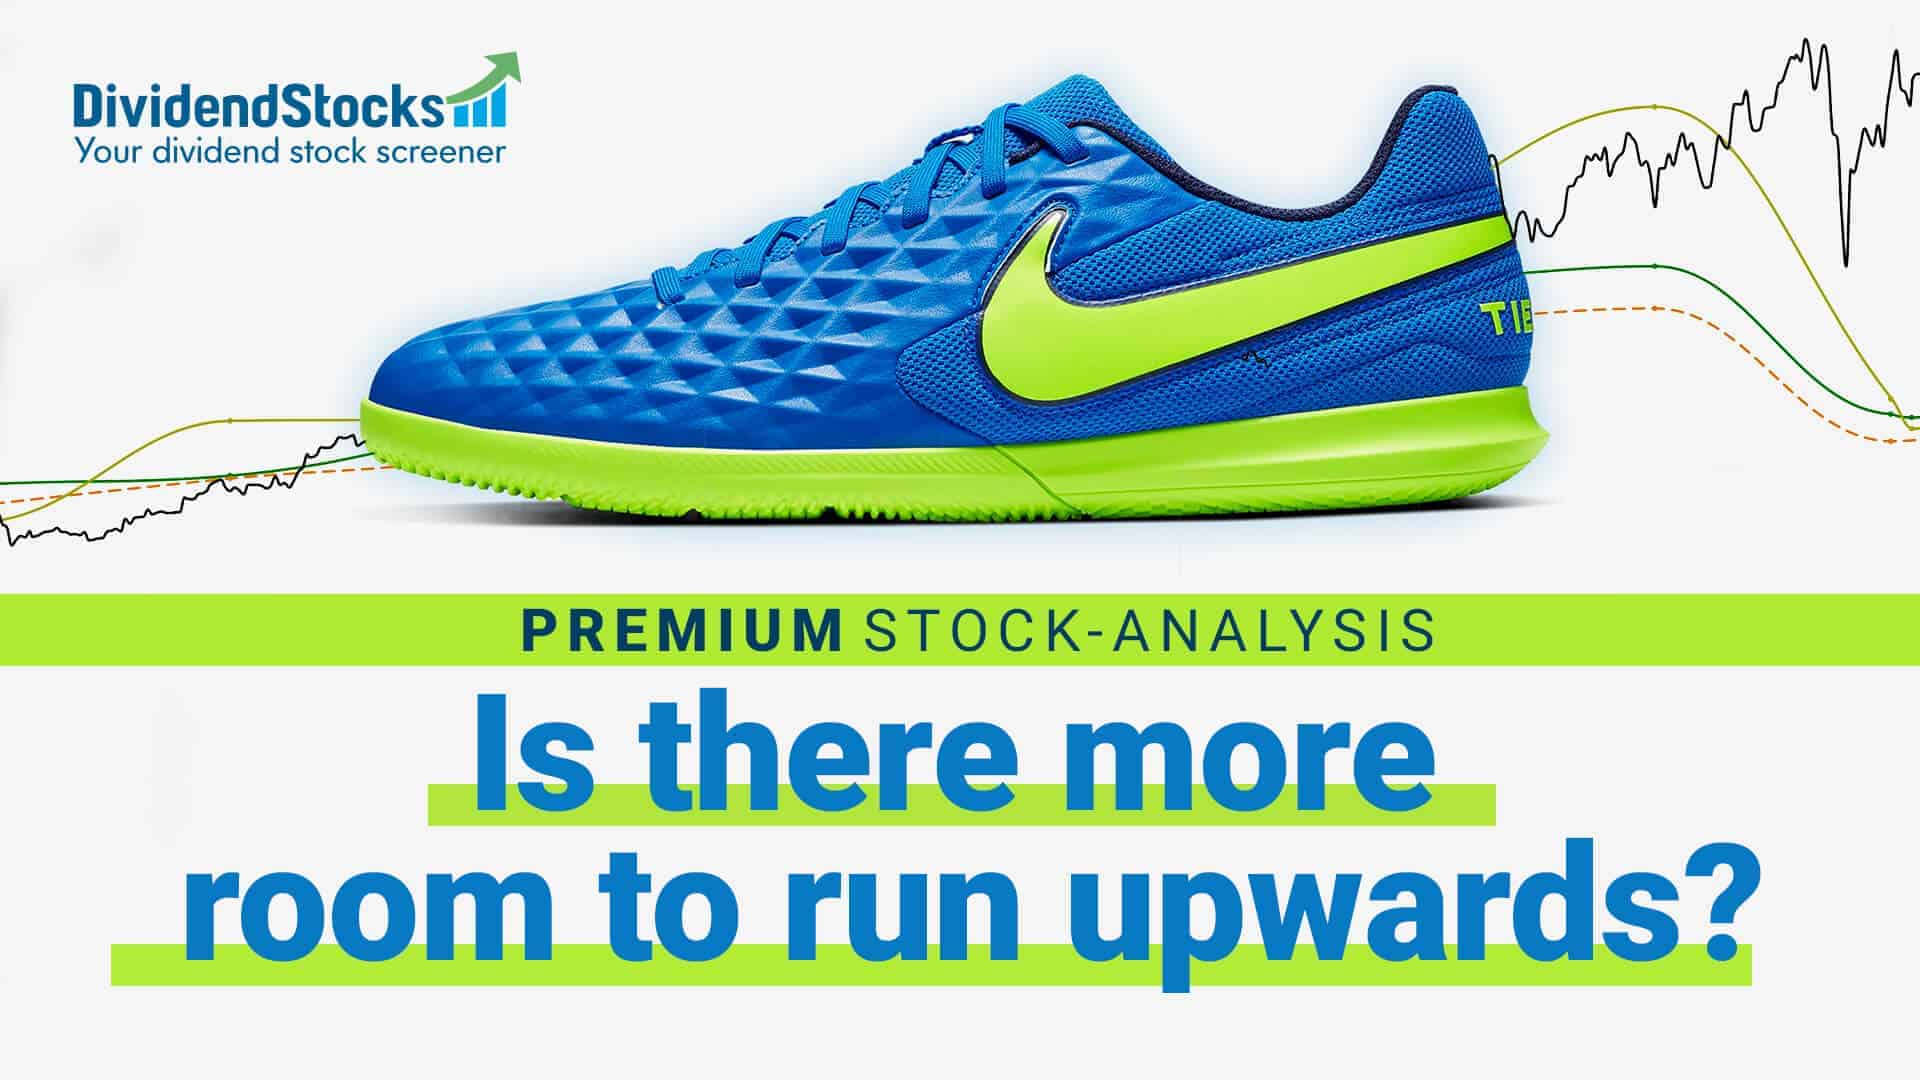 Nike stock: Is there more room run